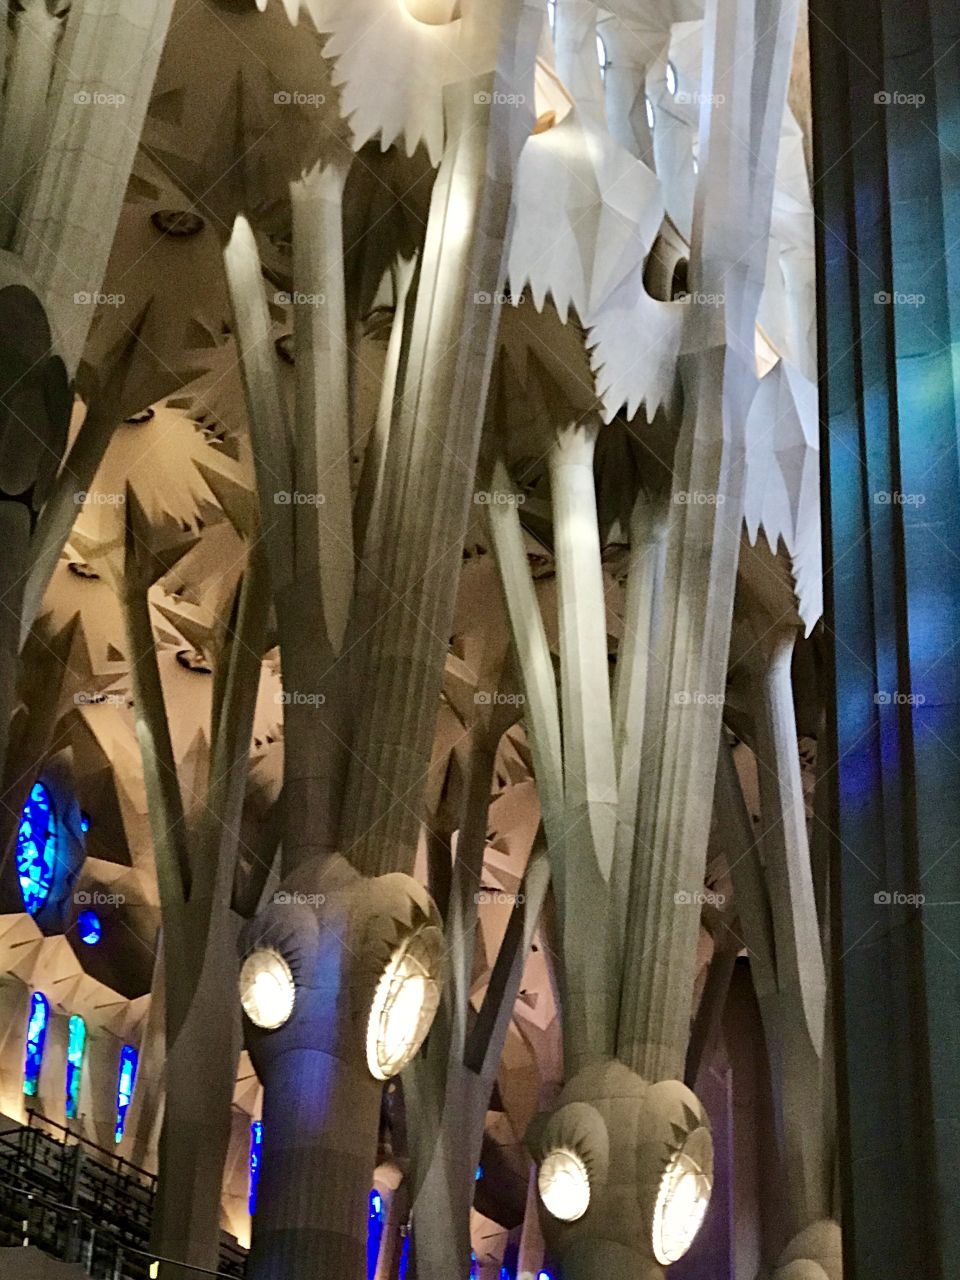 The hallowed features of Gaudi’s La Sagrada Familia. No picture can capture the total essence of this vision of on mans passionate mind!